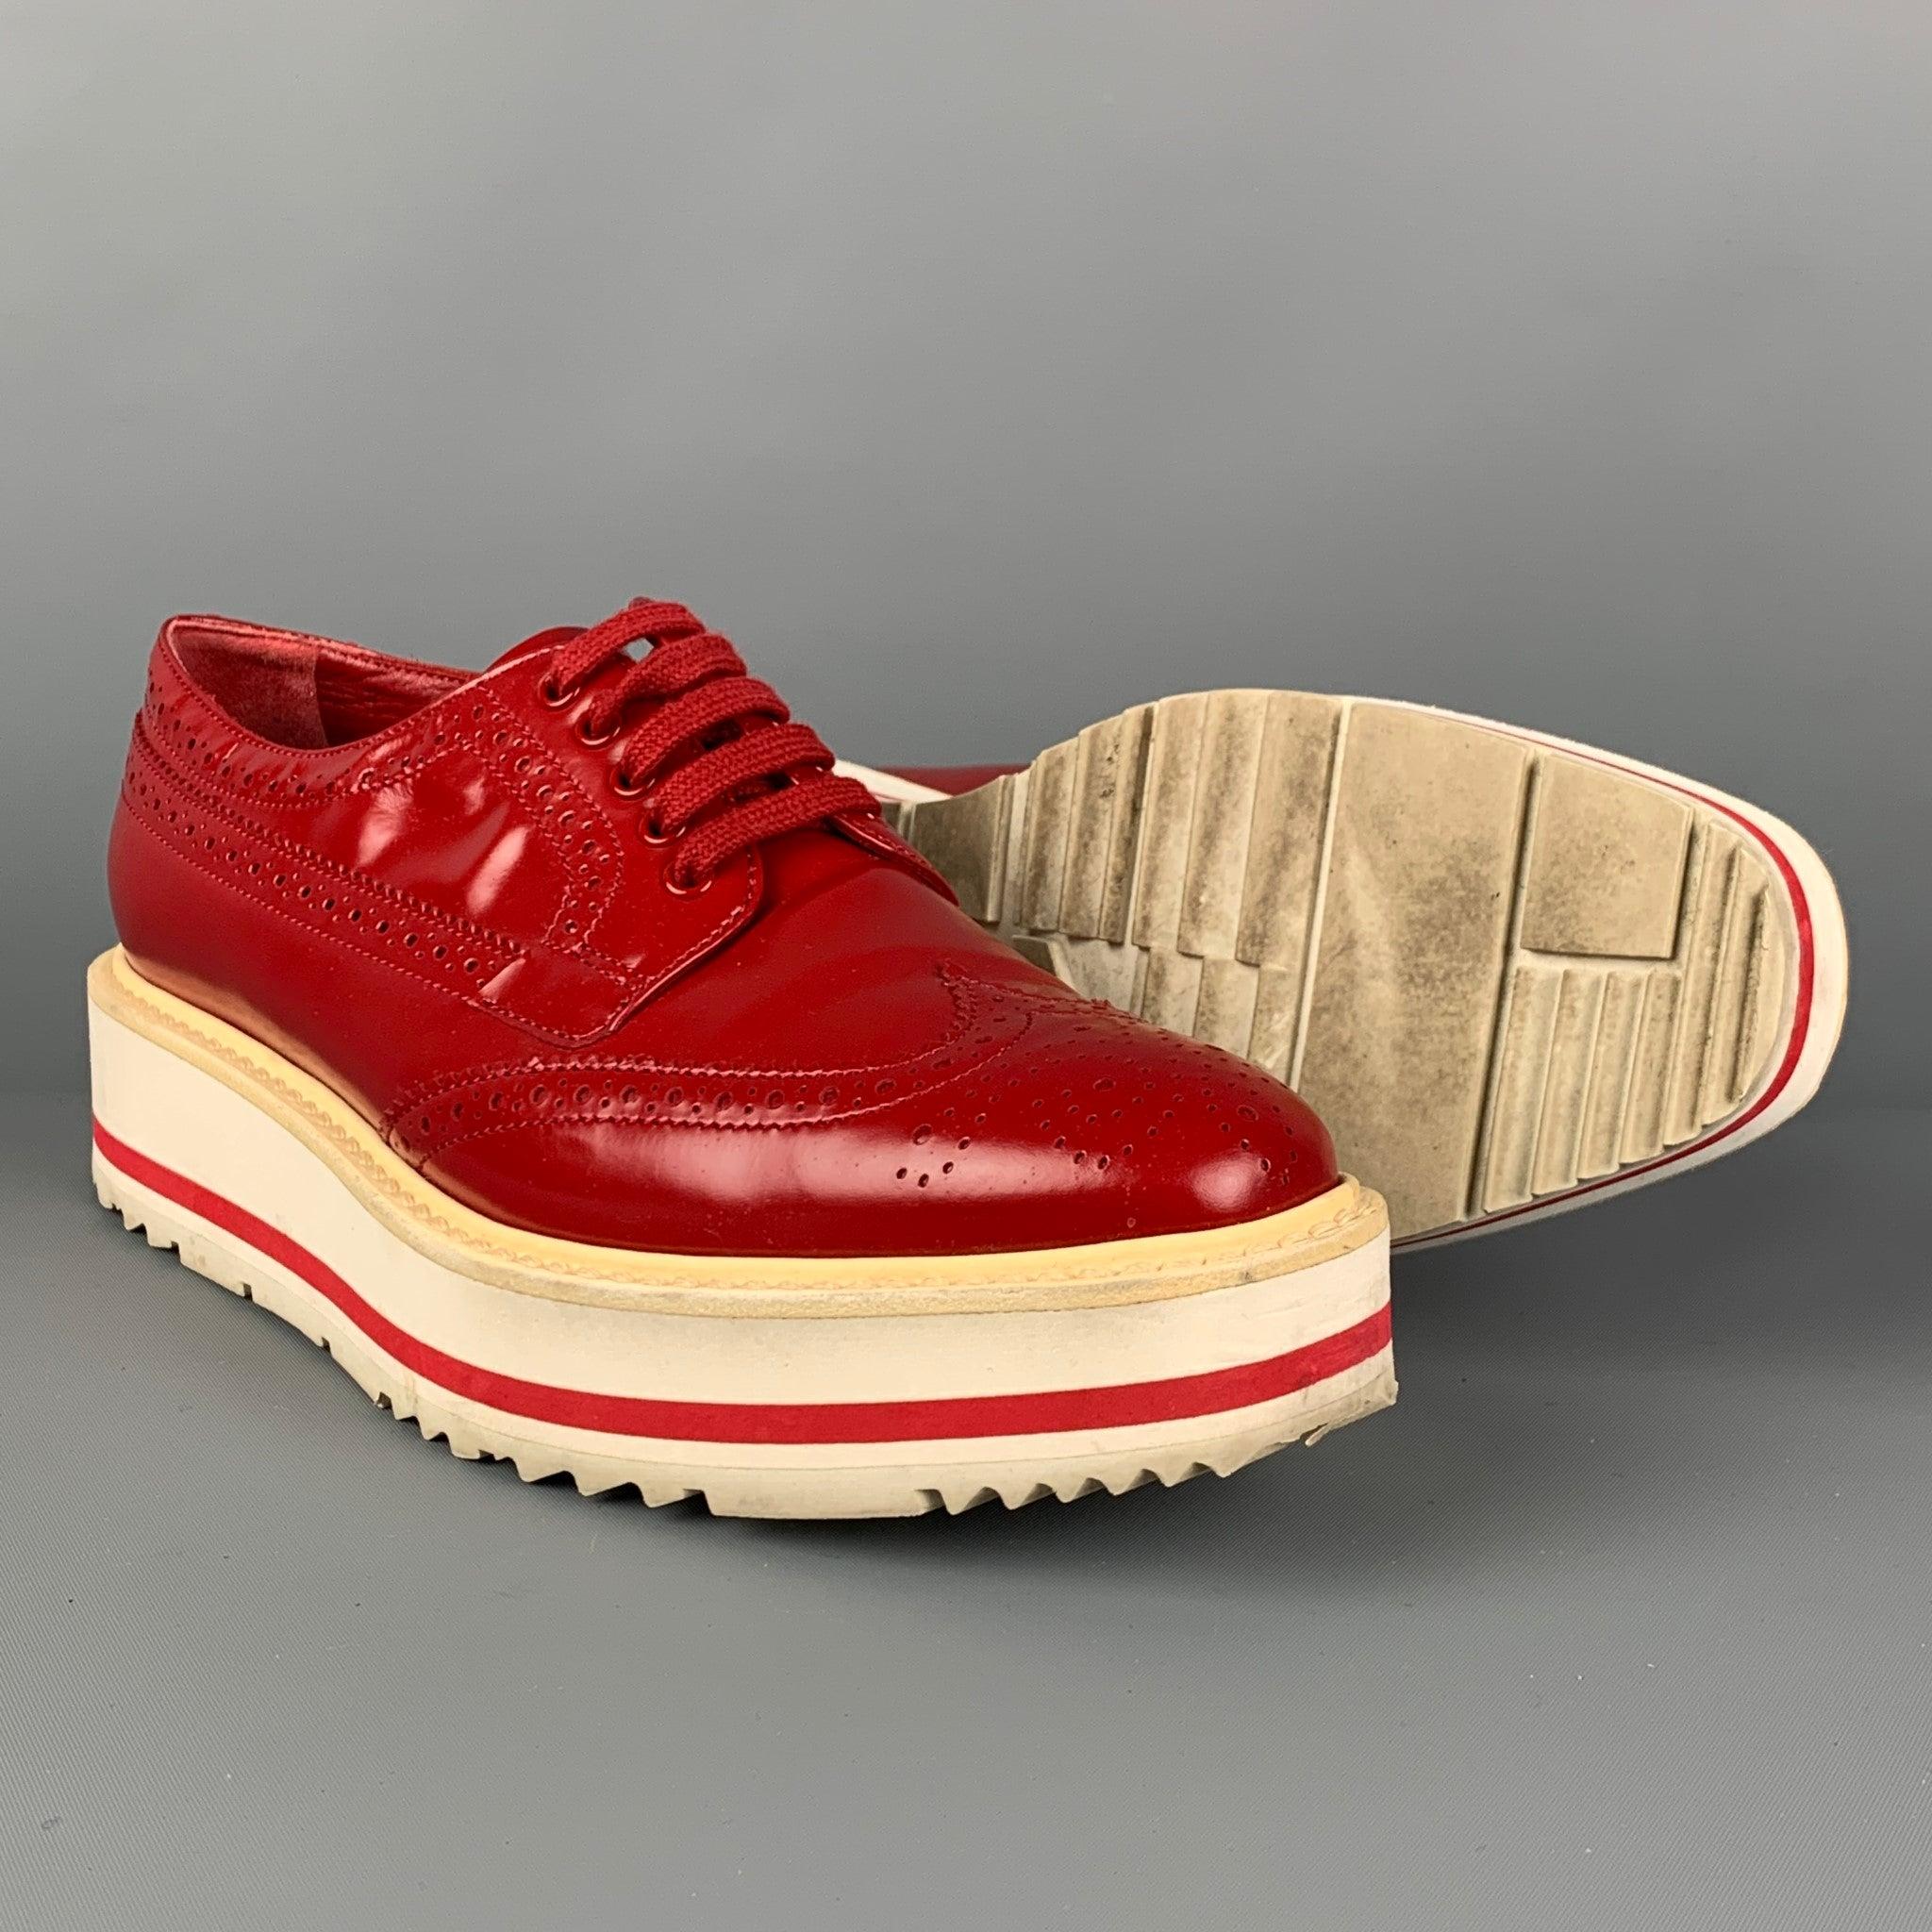 PRADA Size 6 Red White Leather Perforated Wingtip Shoes In Good Condition For Sale In San Francisco, CA